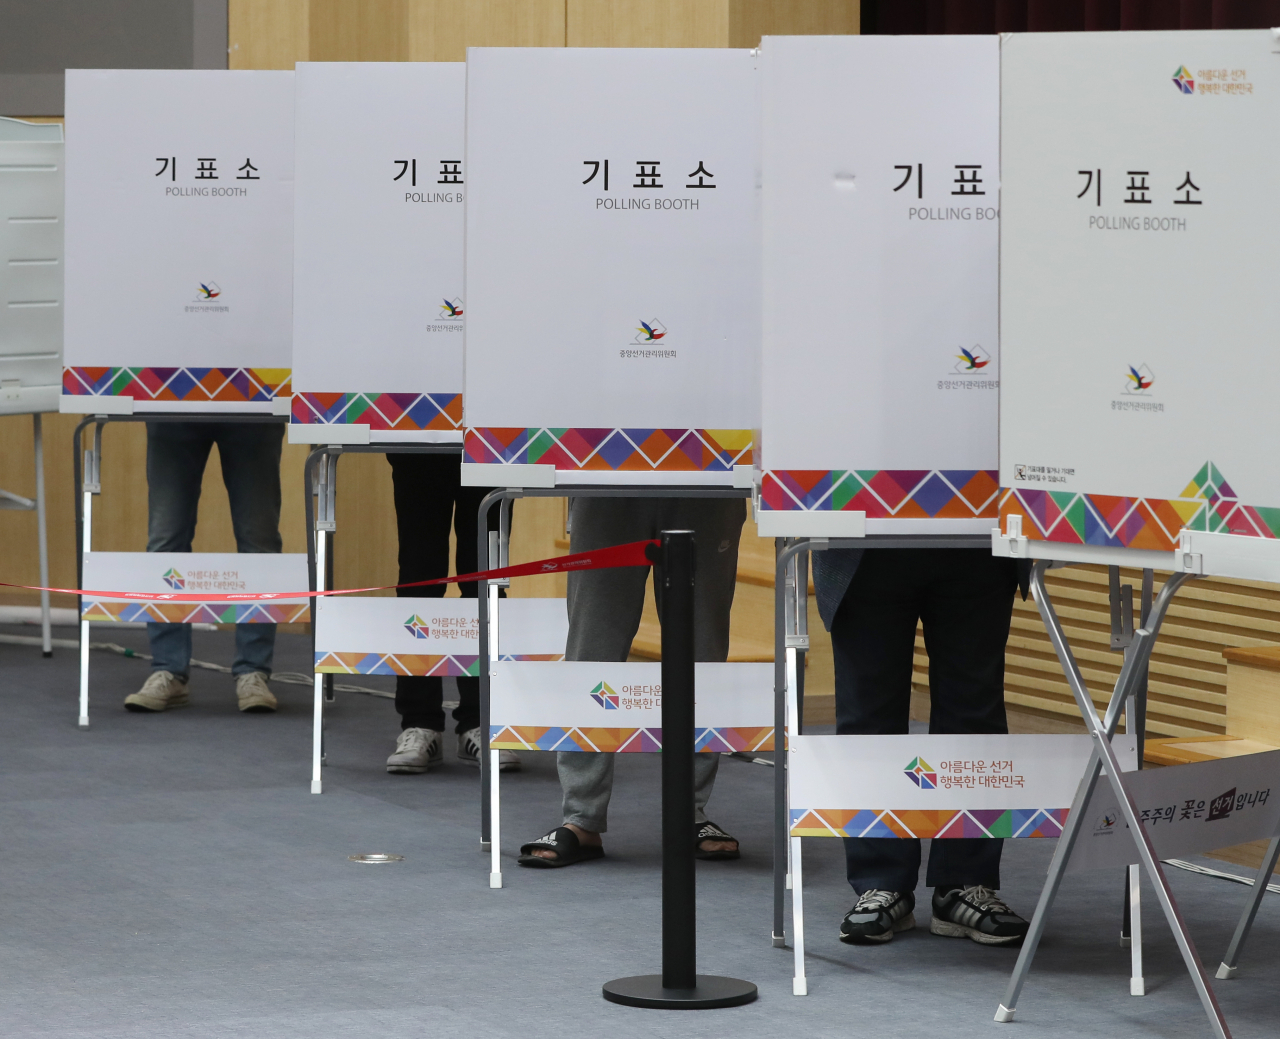 Voters mark ballots at polling booths at a voting center in Ulsan last Friday, the first day of two-day early voting for the June 1 local elections and parliamentary by-elections. (Yonhap)